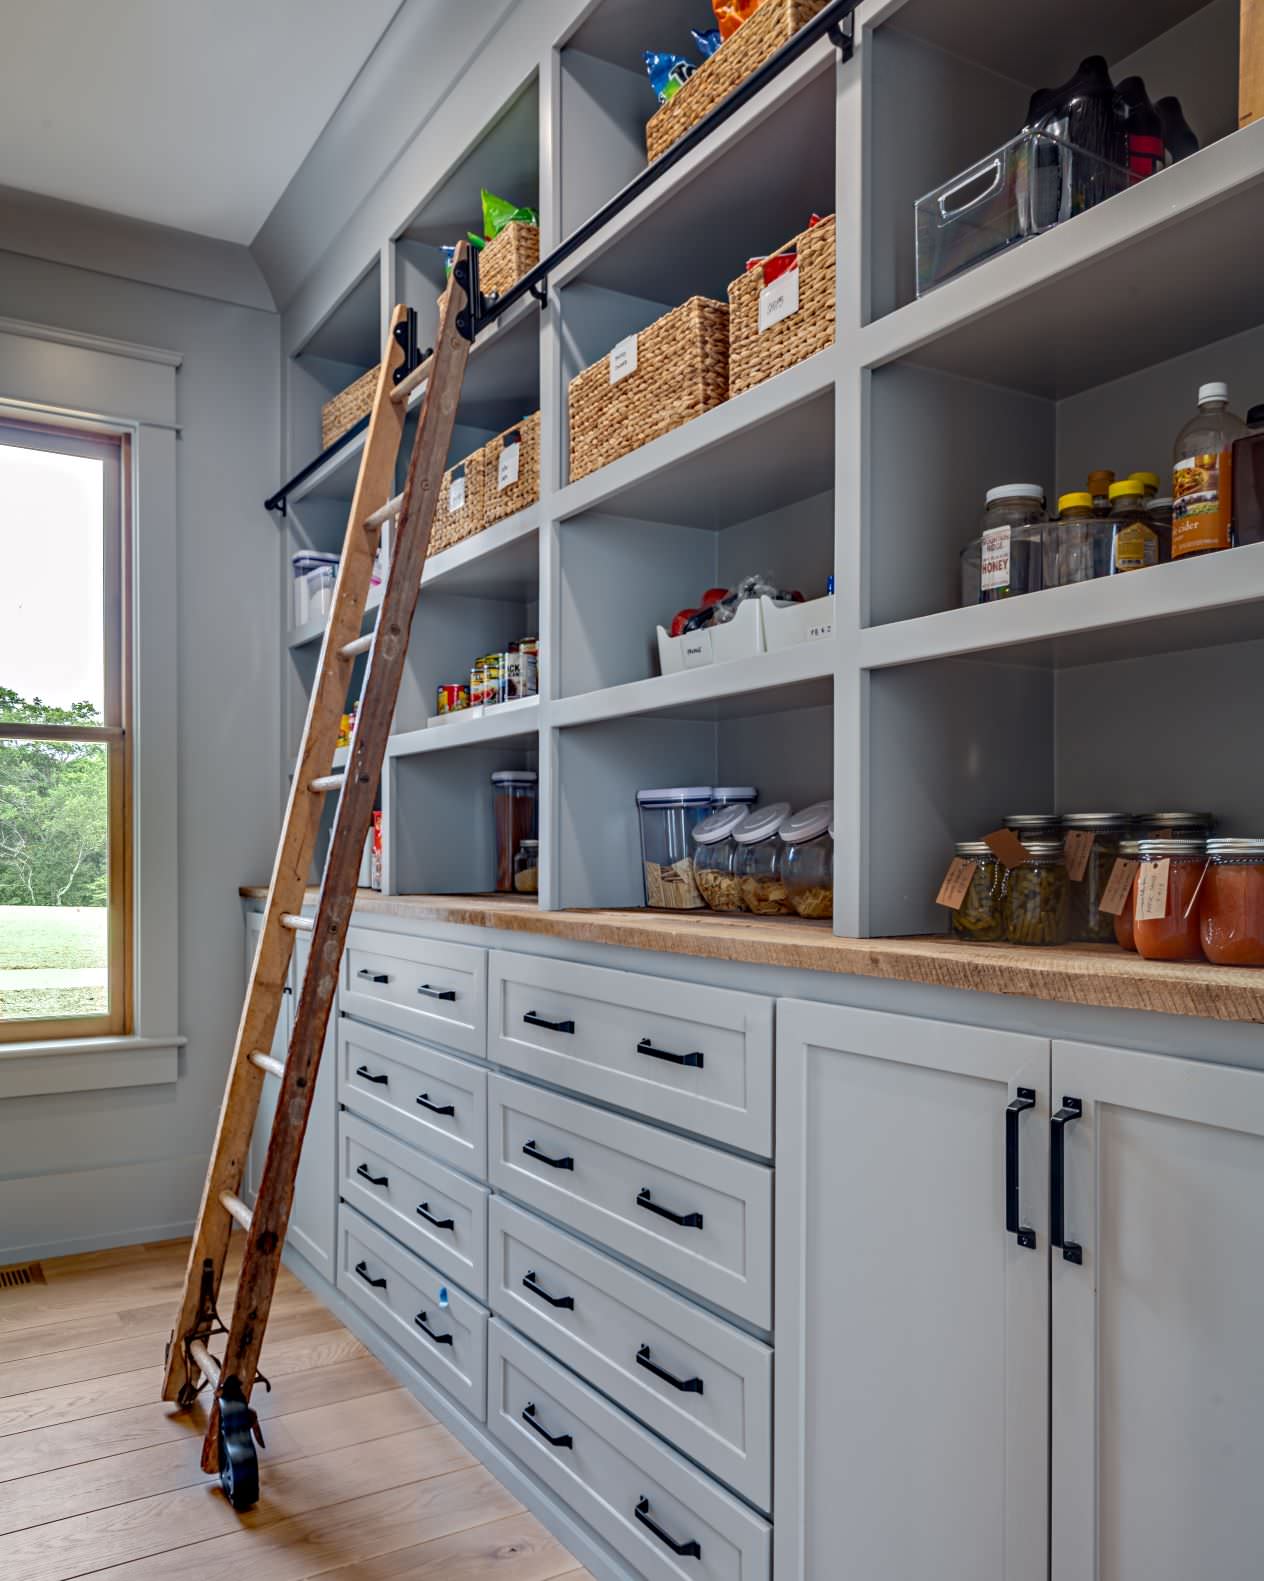 75 Beautiful Single Wall Kitchen Pantry Pictures Ideas March 2021 Houzz